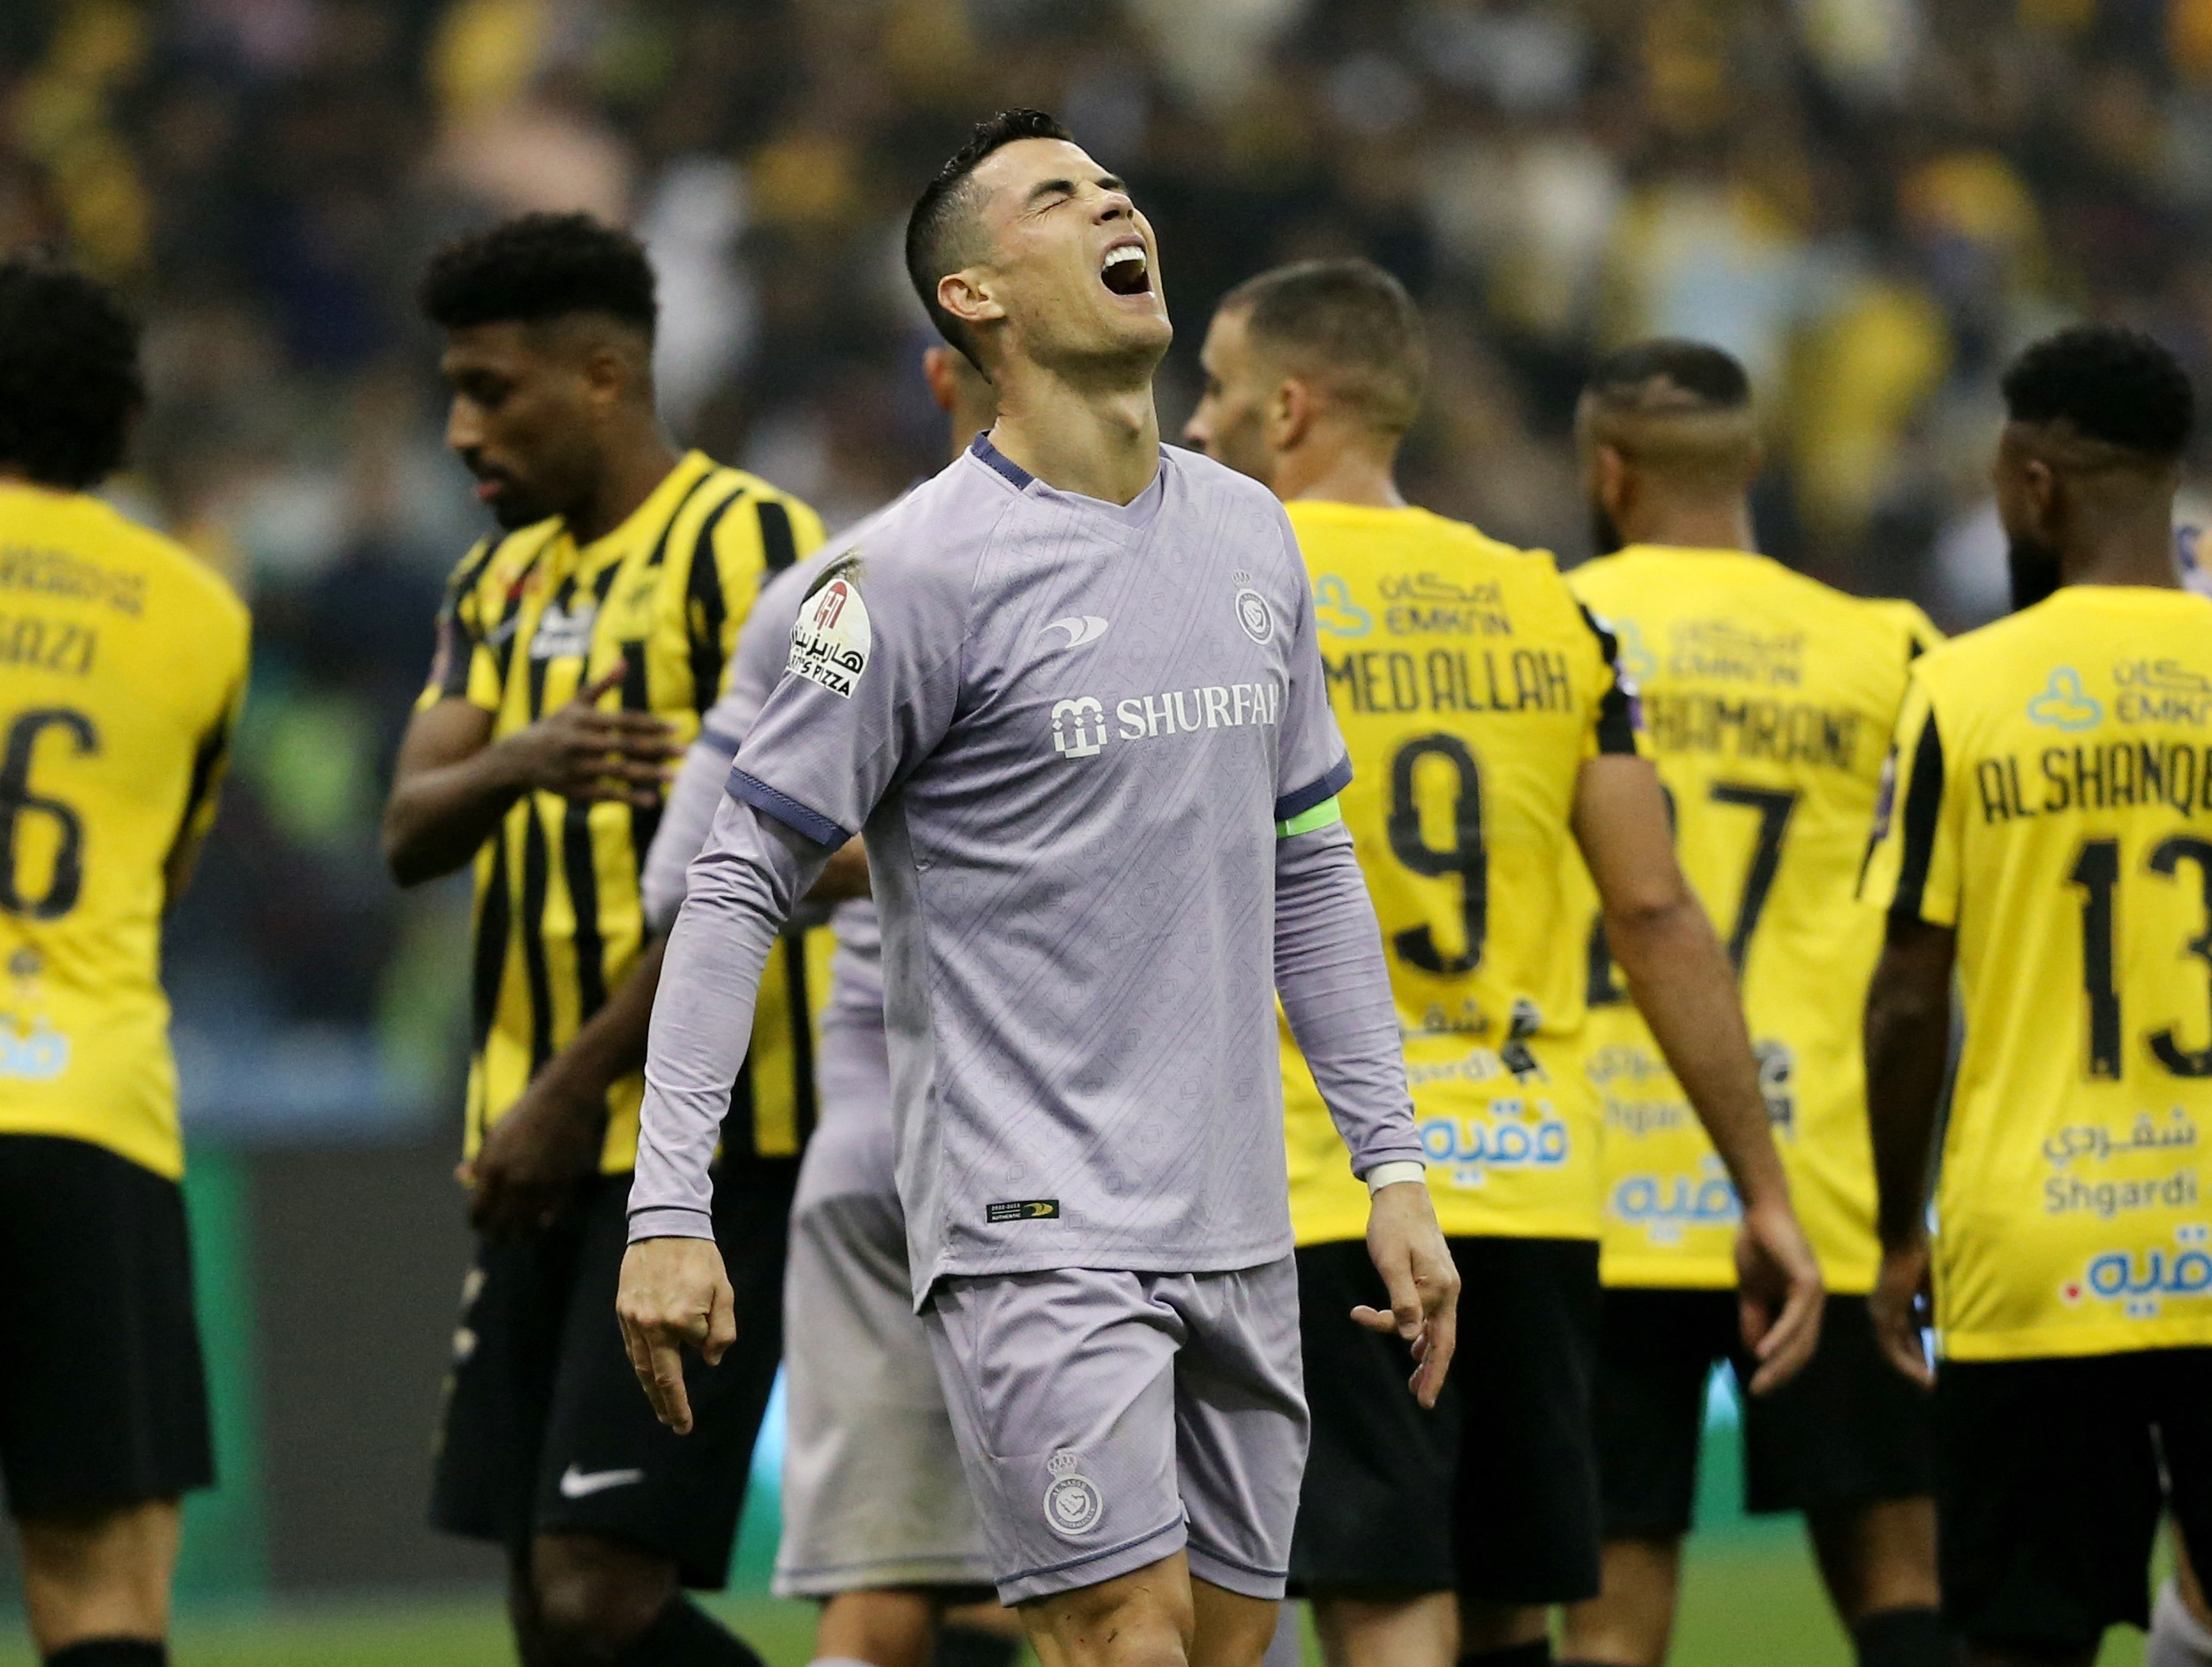 Ittihad Jeddah fans provoke Ronaldo with a compelling cheer (video)